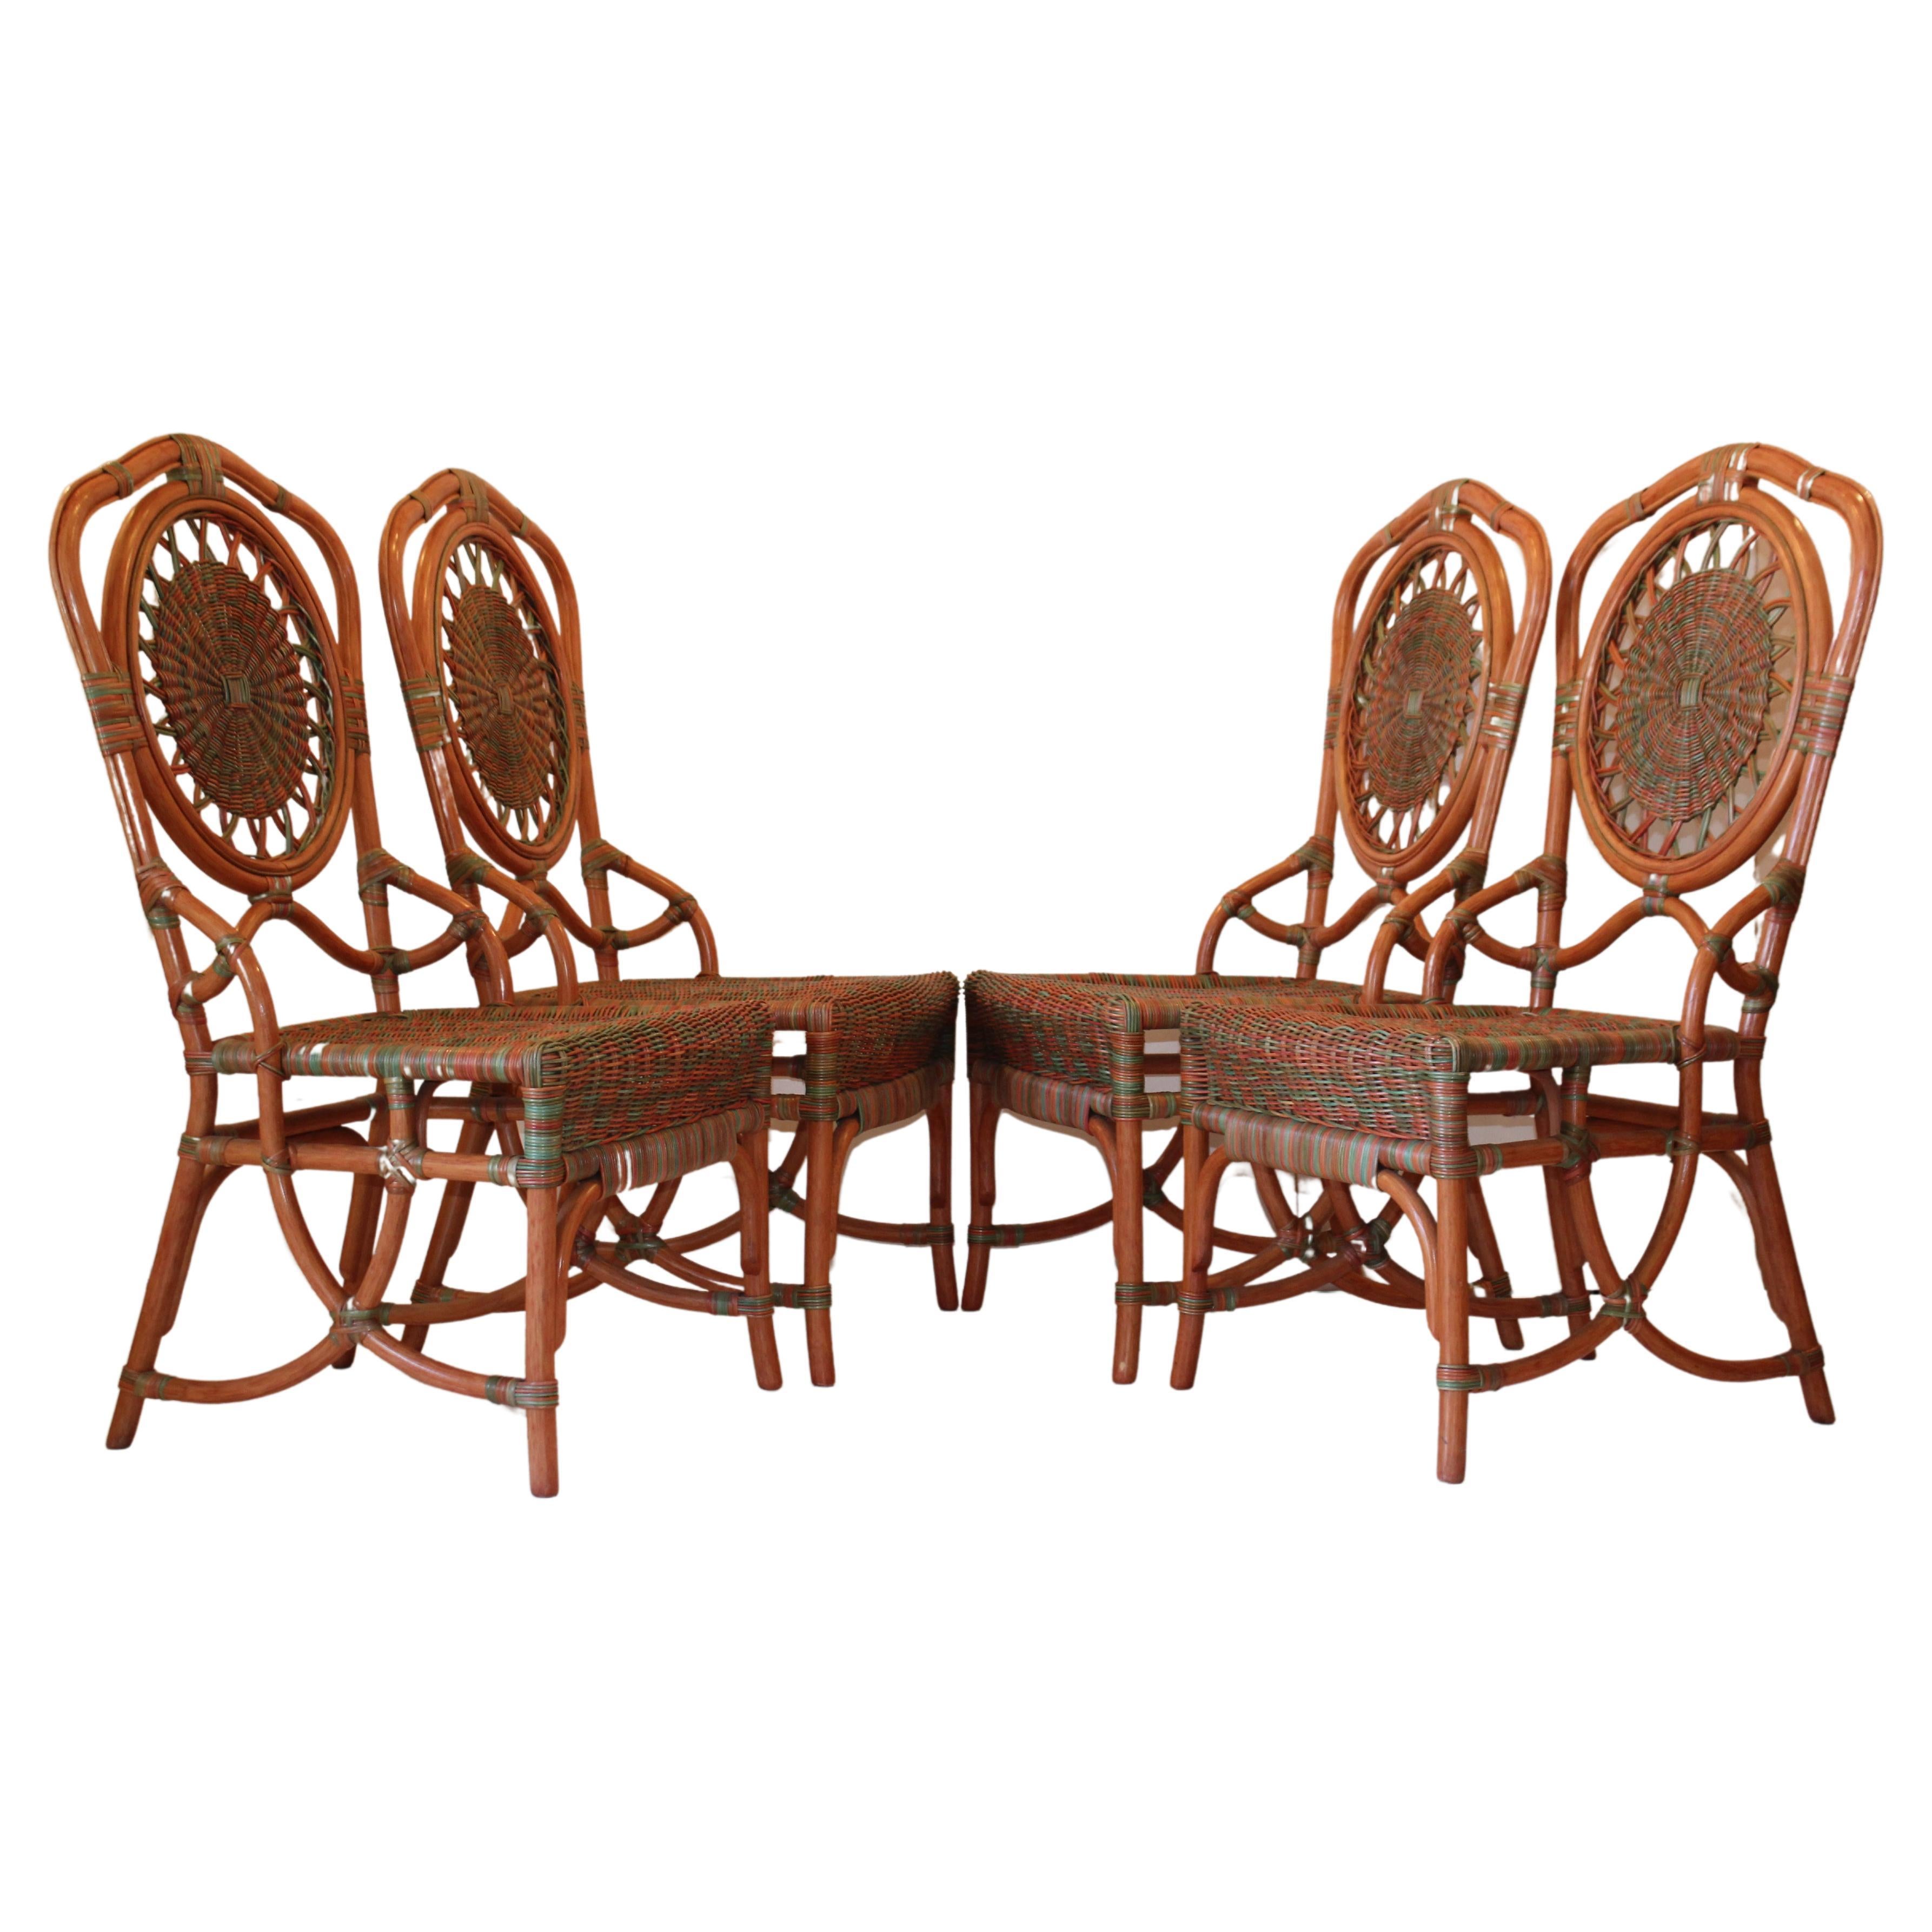 1960s Vintage Rattan Dining Chairs, Set of Four